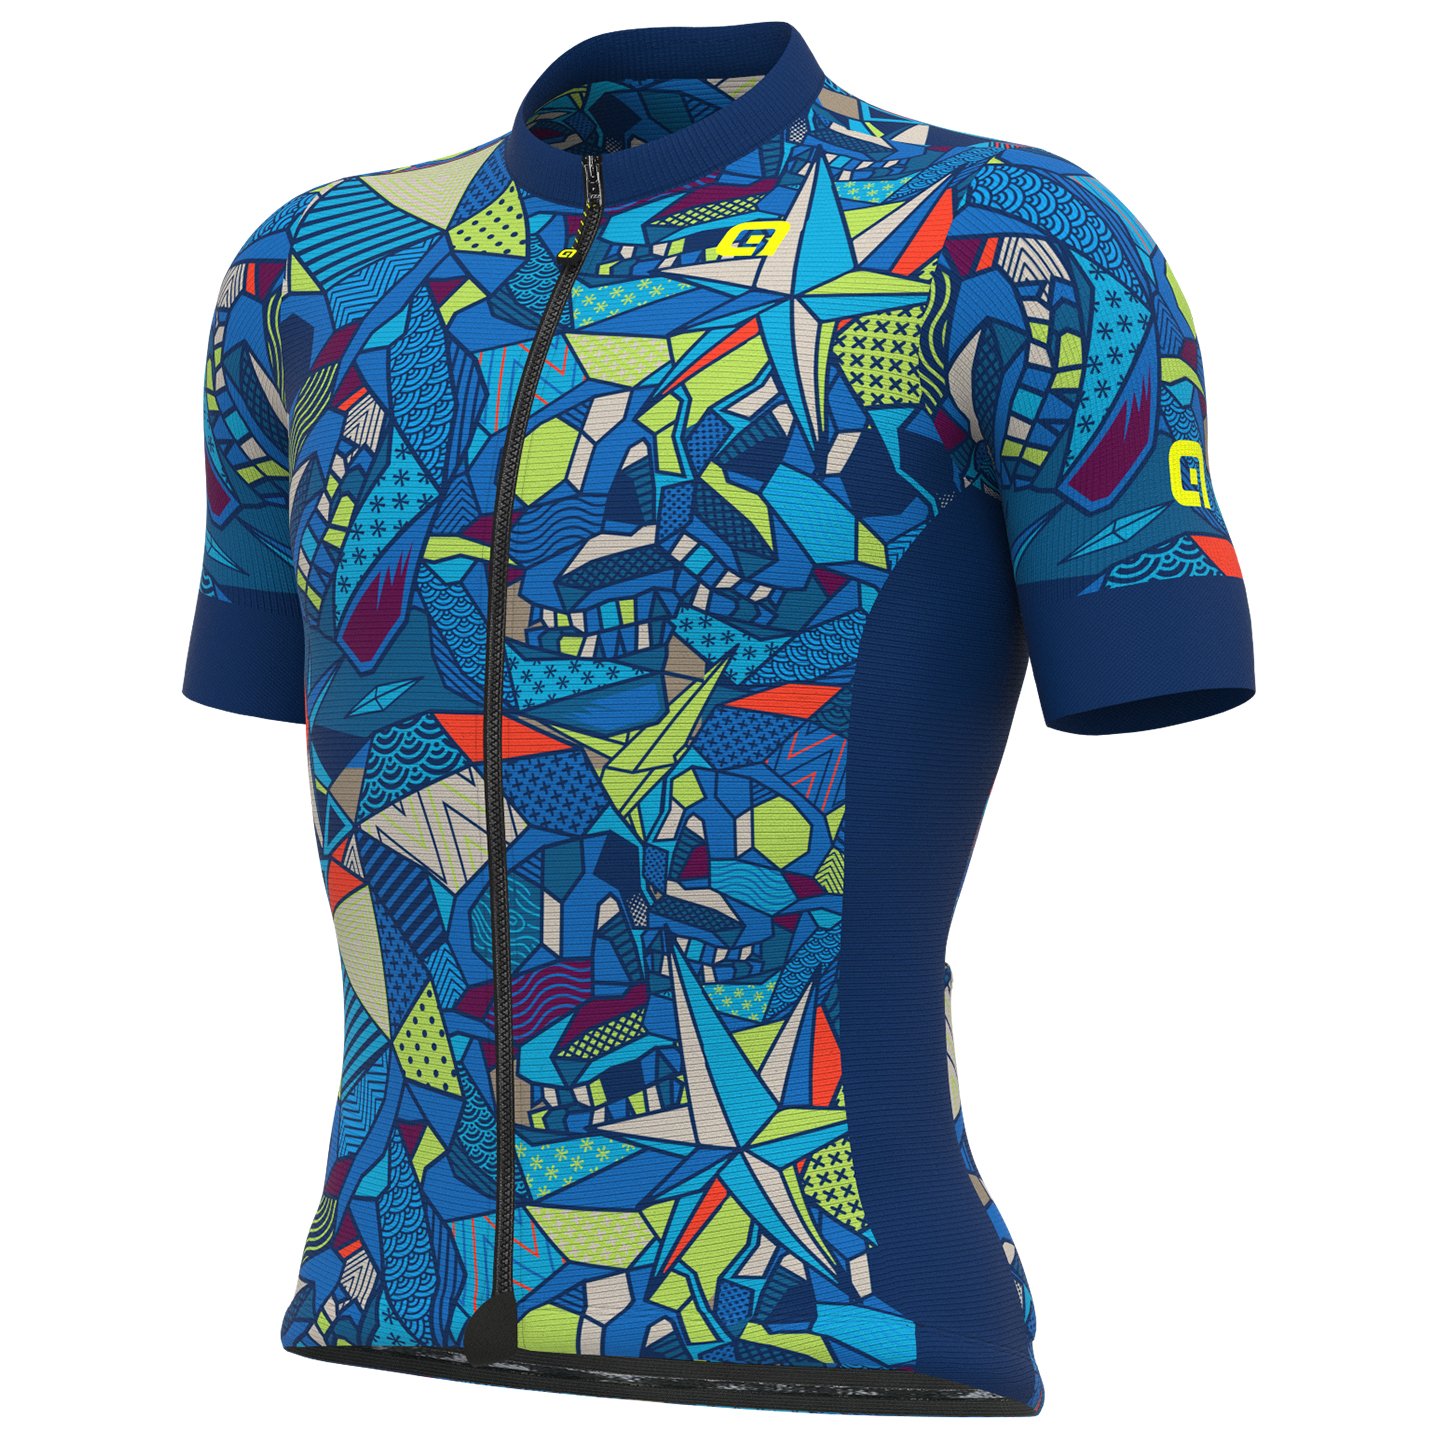 ALE Over Short Sleeve Jersey, for men, size L, Cycling jersey, Cycling clothing